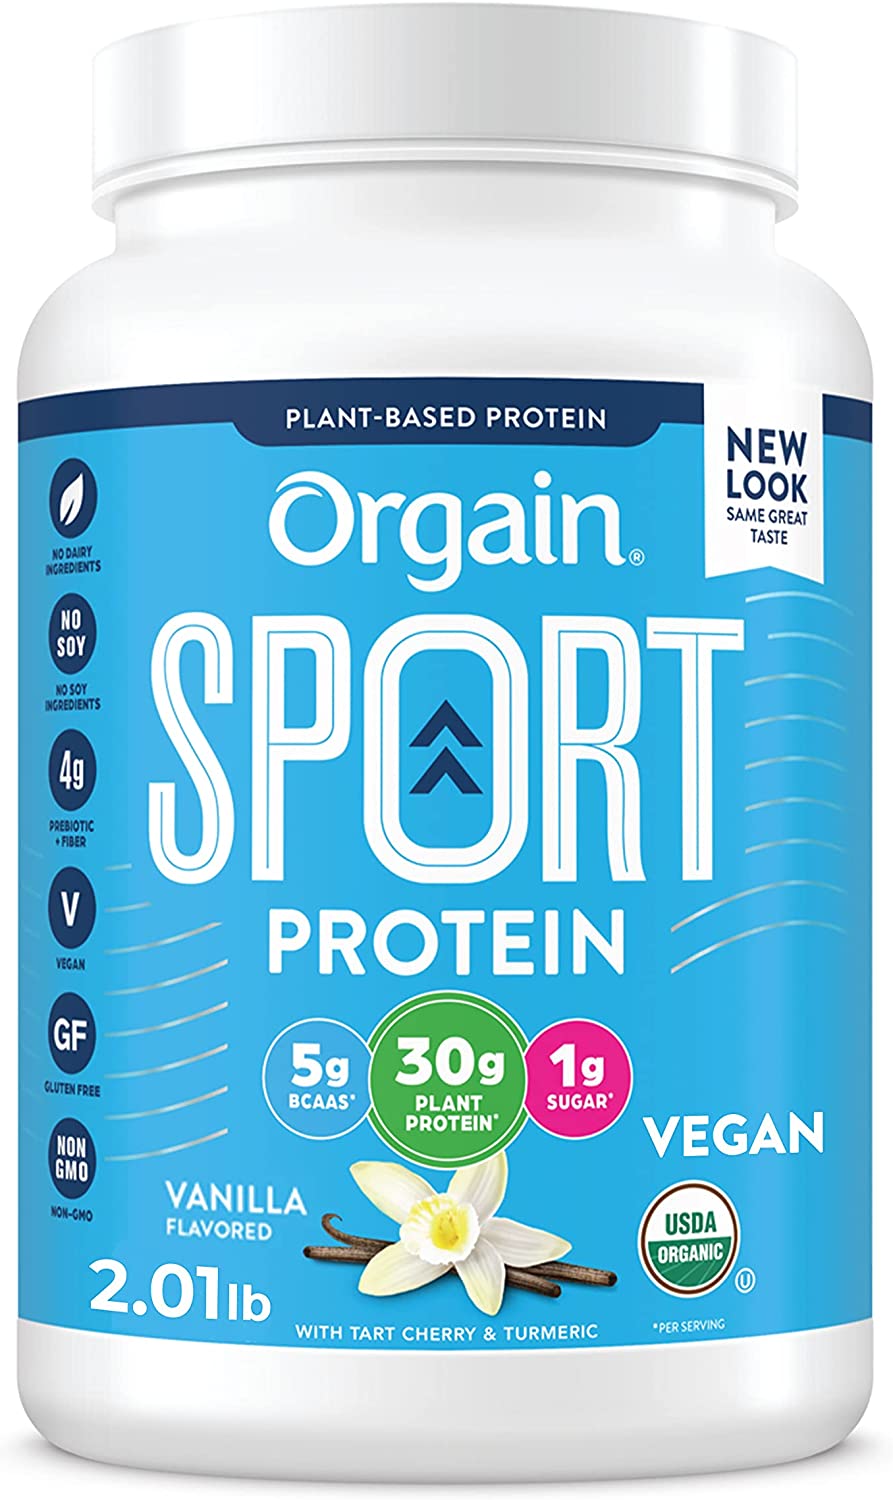 Orgain Vanilla Sport Plant-Based Protein Powder - 30g of Protein, Made with Organic Turmeric, Ginger, Beets, Chia Seeds, Brown Rice and Fiber, Vegan